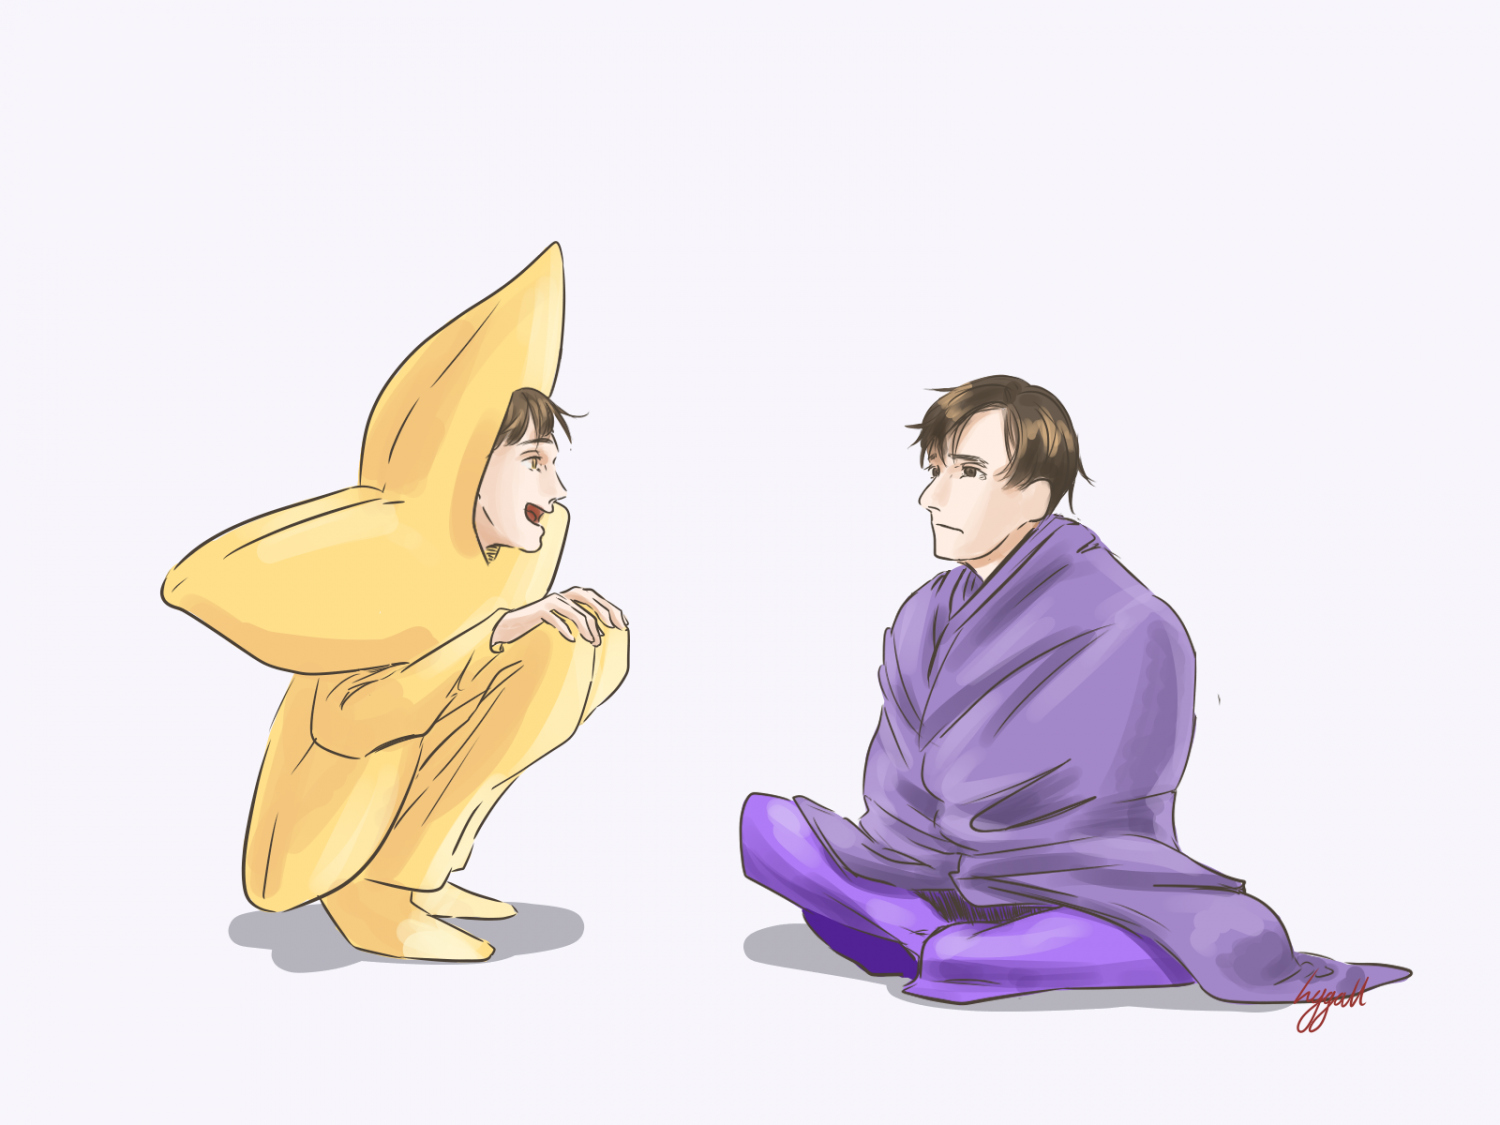 Star and Kevin in the puple blanket 1.png